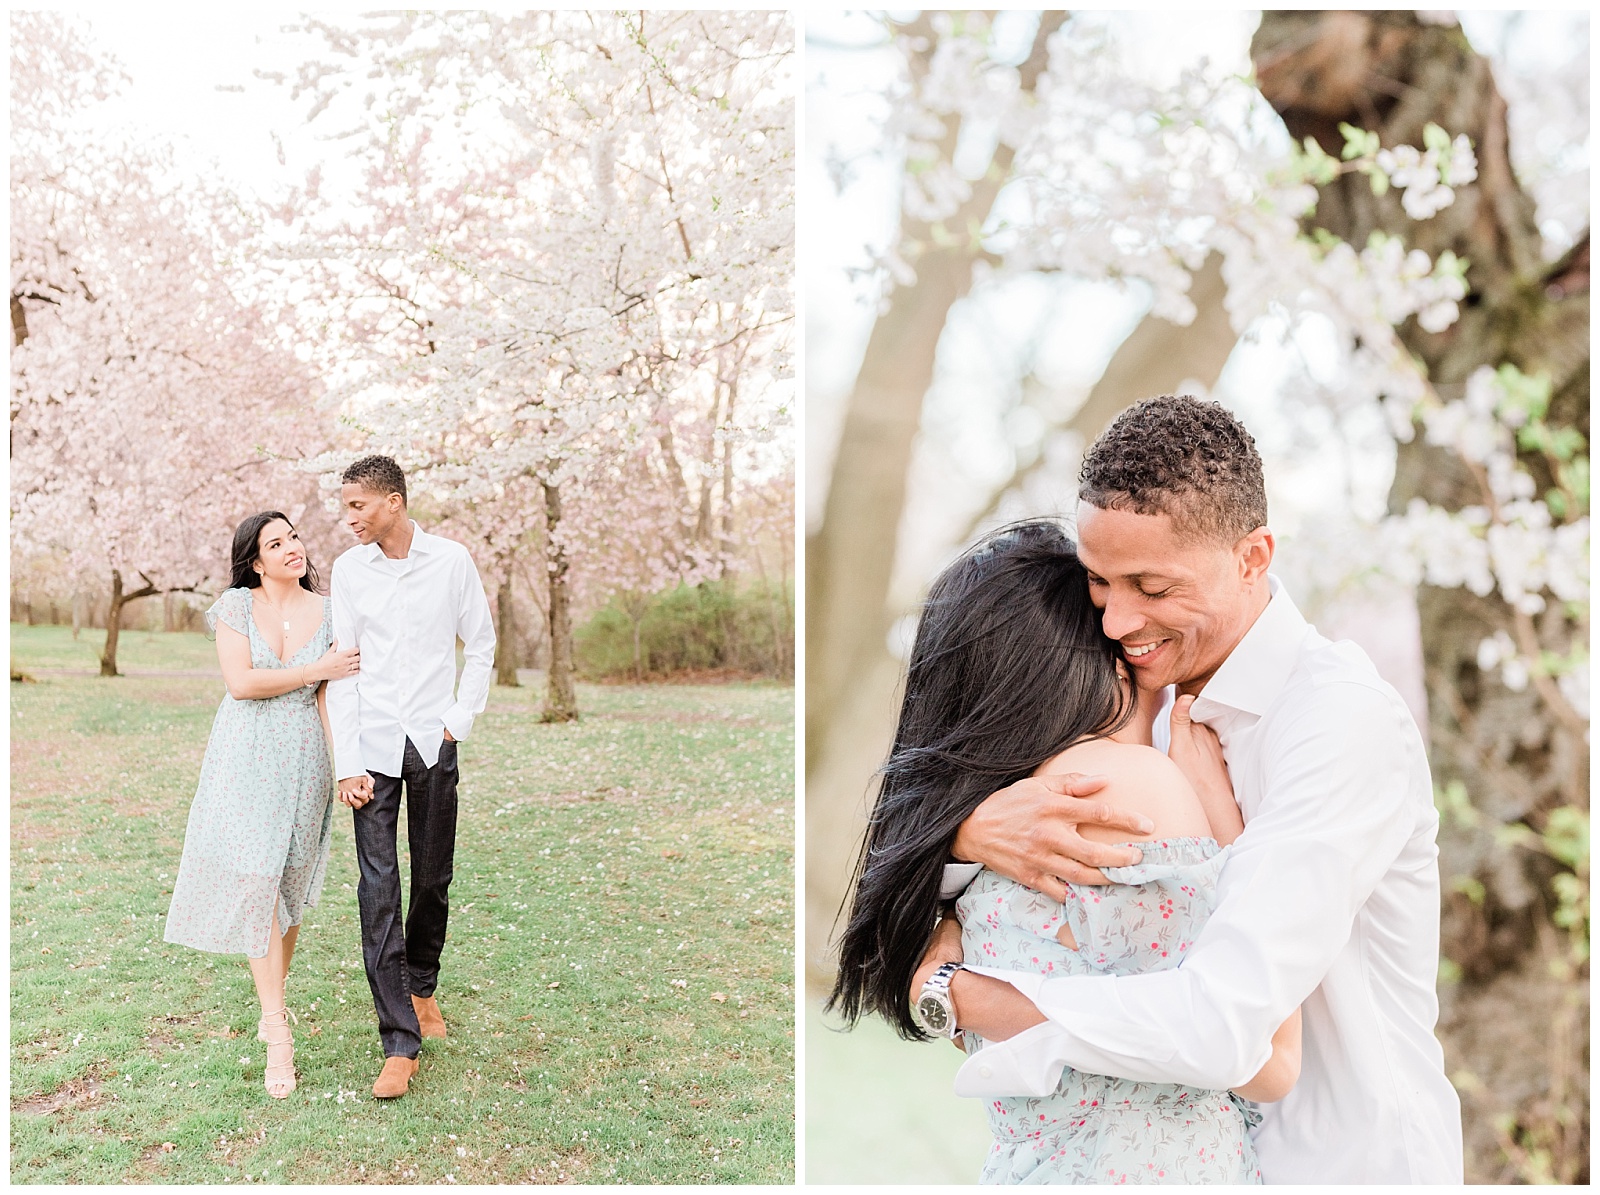 A man hugs his fiance in Branch Brook Park under the cherry blossom trees.